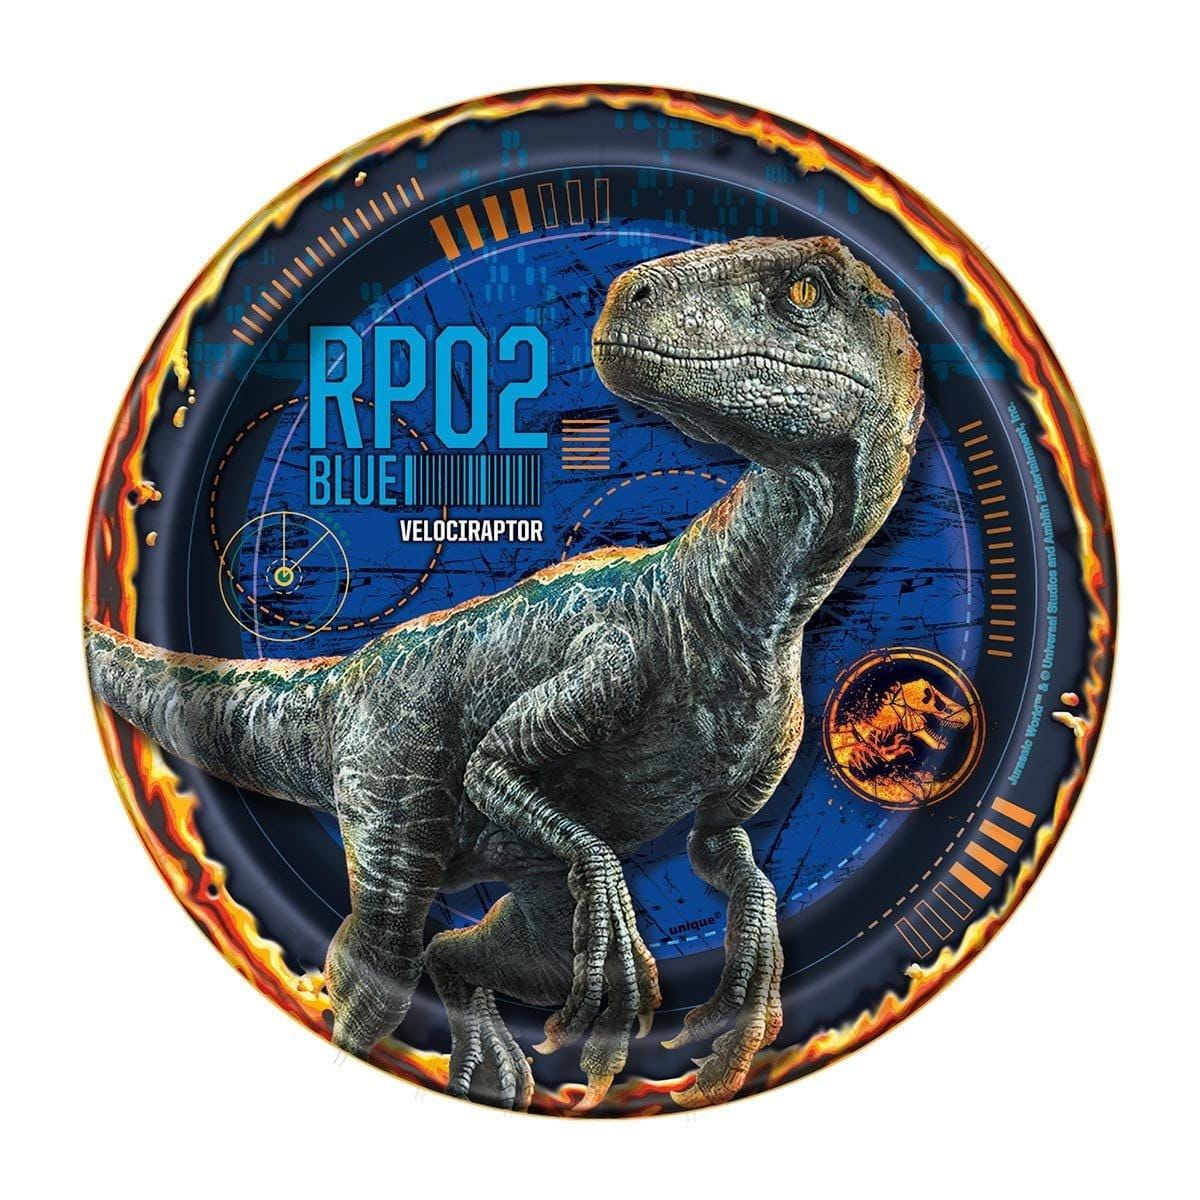 Buy Kids Birthday Jurassic World Dessert Plates 7 inches, 8 per package sold at Party Expert